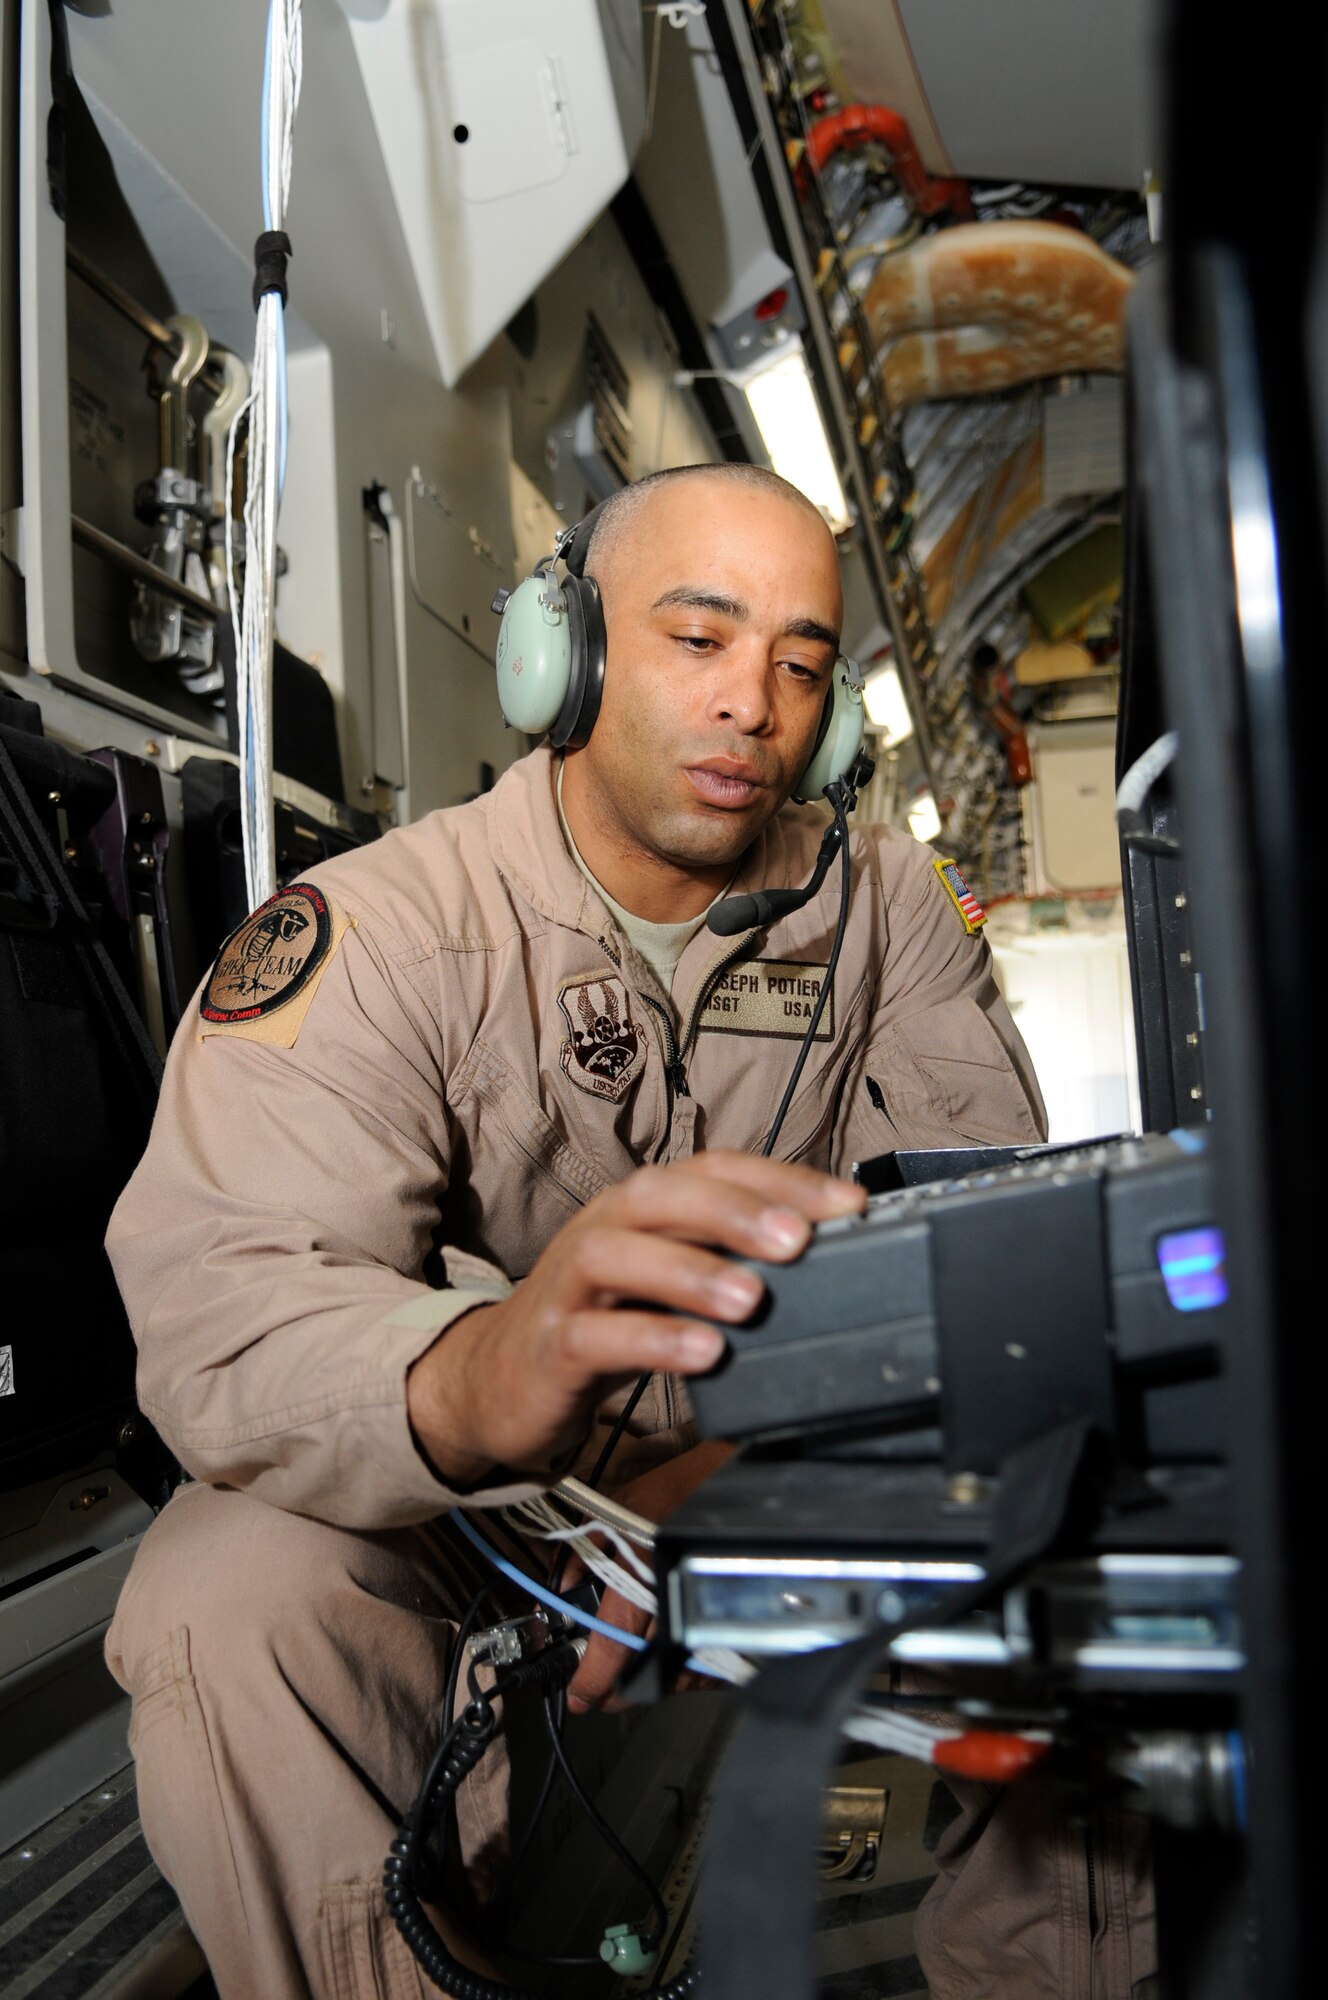 Master Sgt. Joseph Potier, 379th Expeditionary Communications Squadron, talks to the comm. focal point while on a C-17 at a Southwest Asia air base Feb 19. He performs function checks to ensure distinguished visitors can make secure calls through the Viper system. He is from Leonville, LA, deployed from Lackland Air Force Base, Texas. (U.S. Air Force photo/Tech. Sgt. Johnny L. Saldivar)